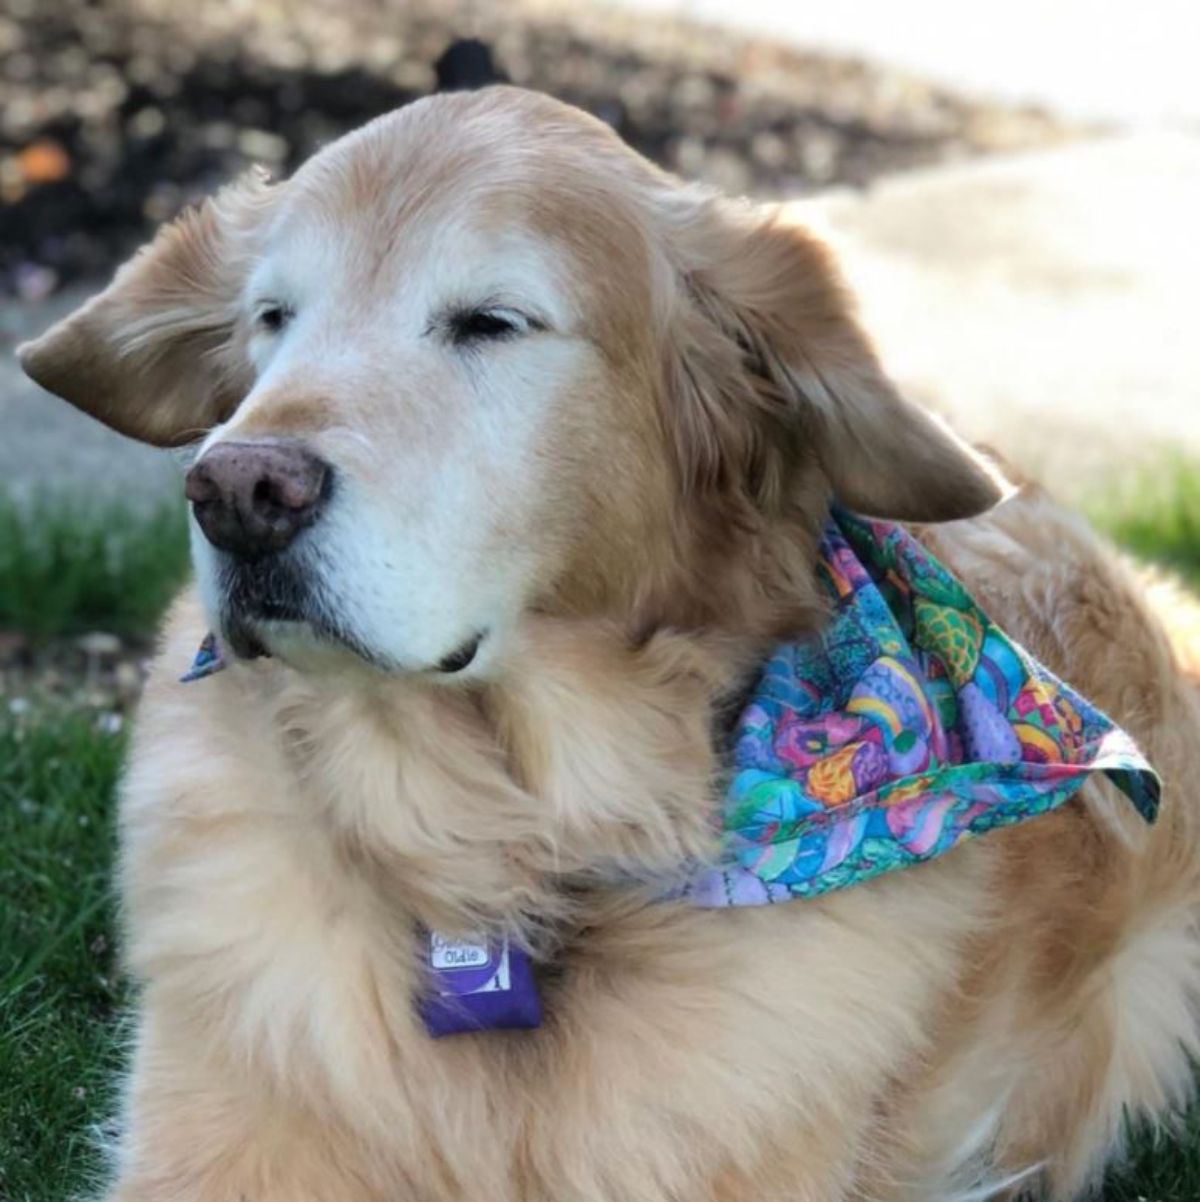 old golden retriever laying down on the ground wearing a colourful bandana and has the ears down and eyes squinted because it's windy